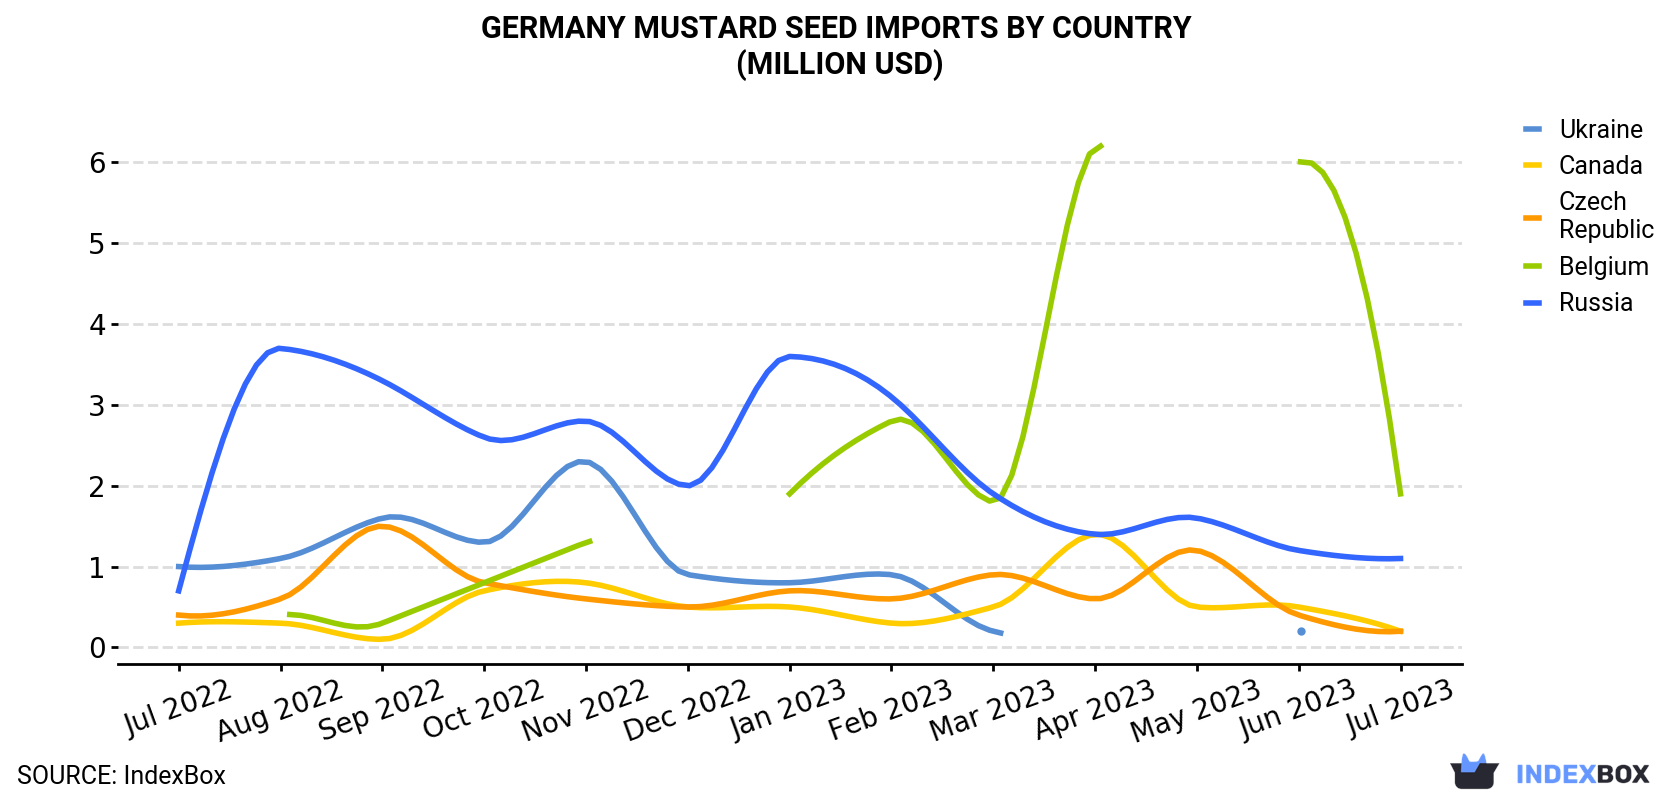 Germany Mustard Seed Imports By Country (Million USD)